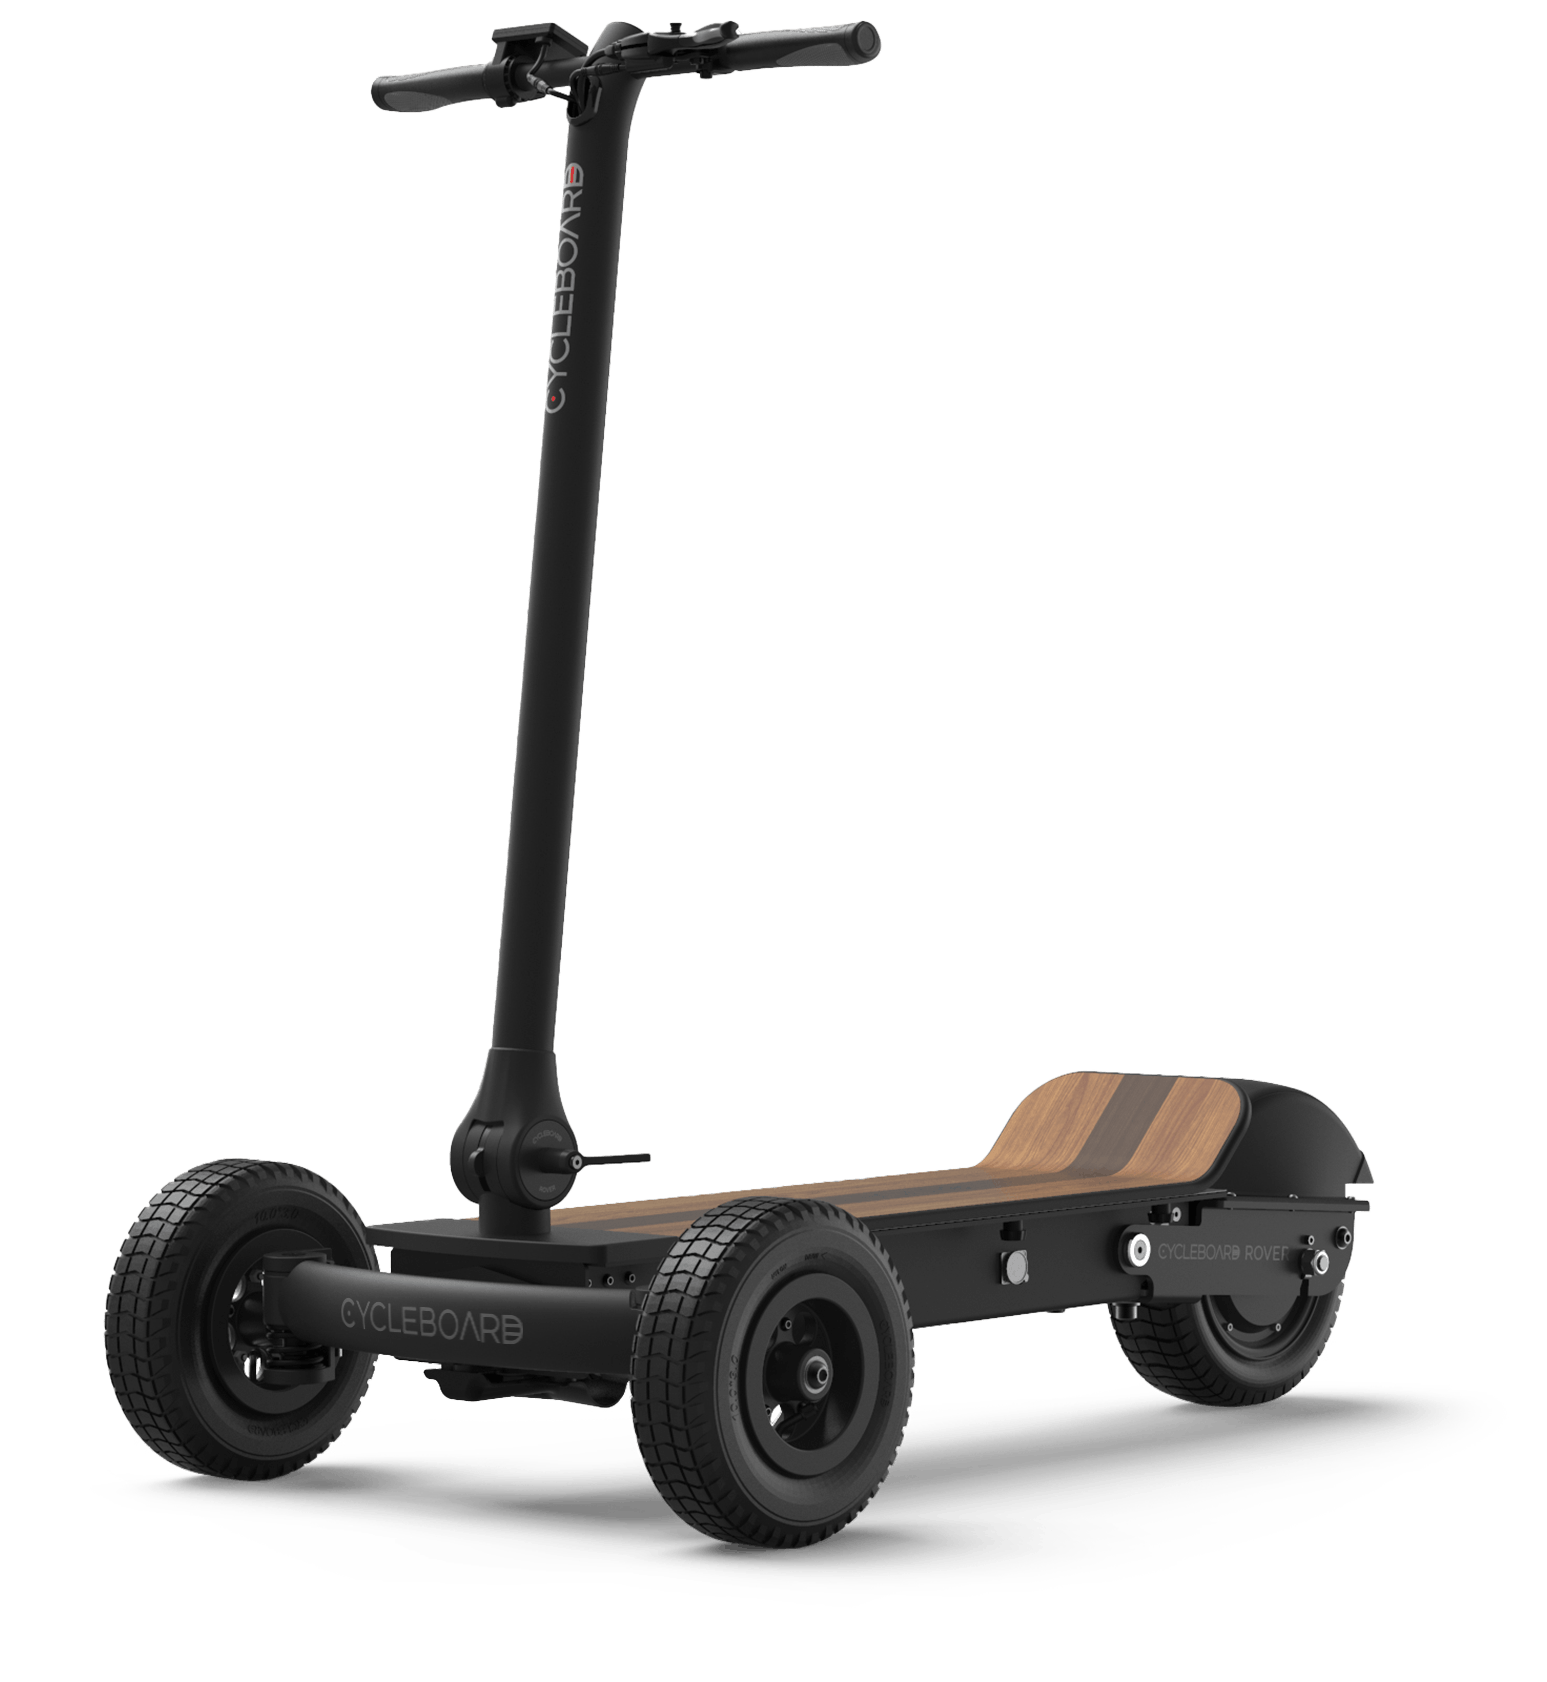 Cycleboard Rover  All-terrain 3 wheeled Electric Vehicle